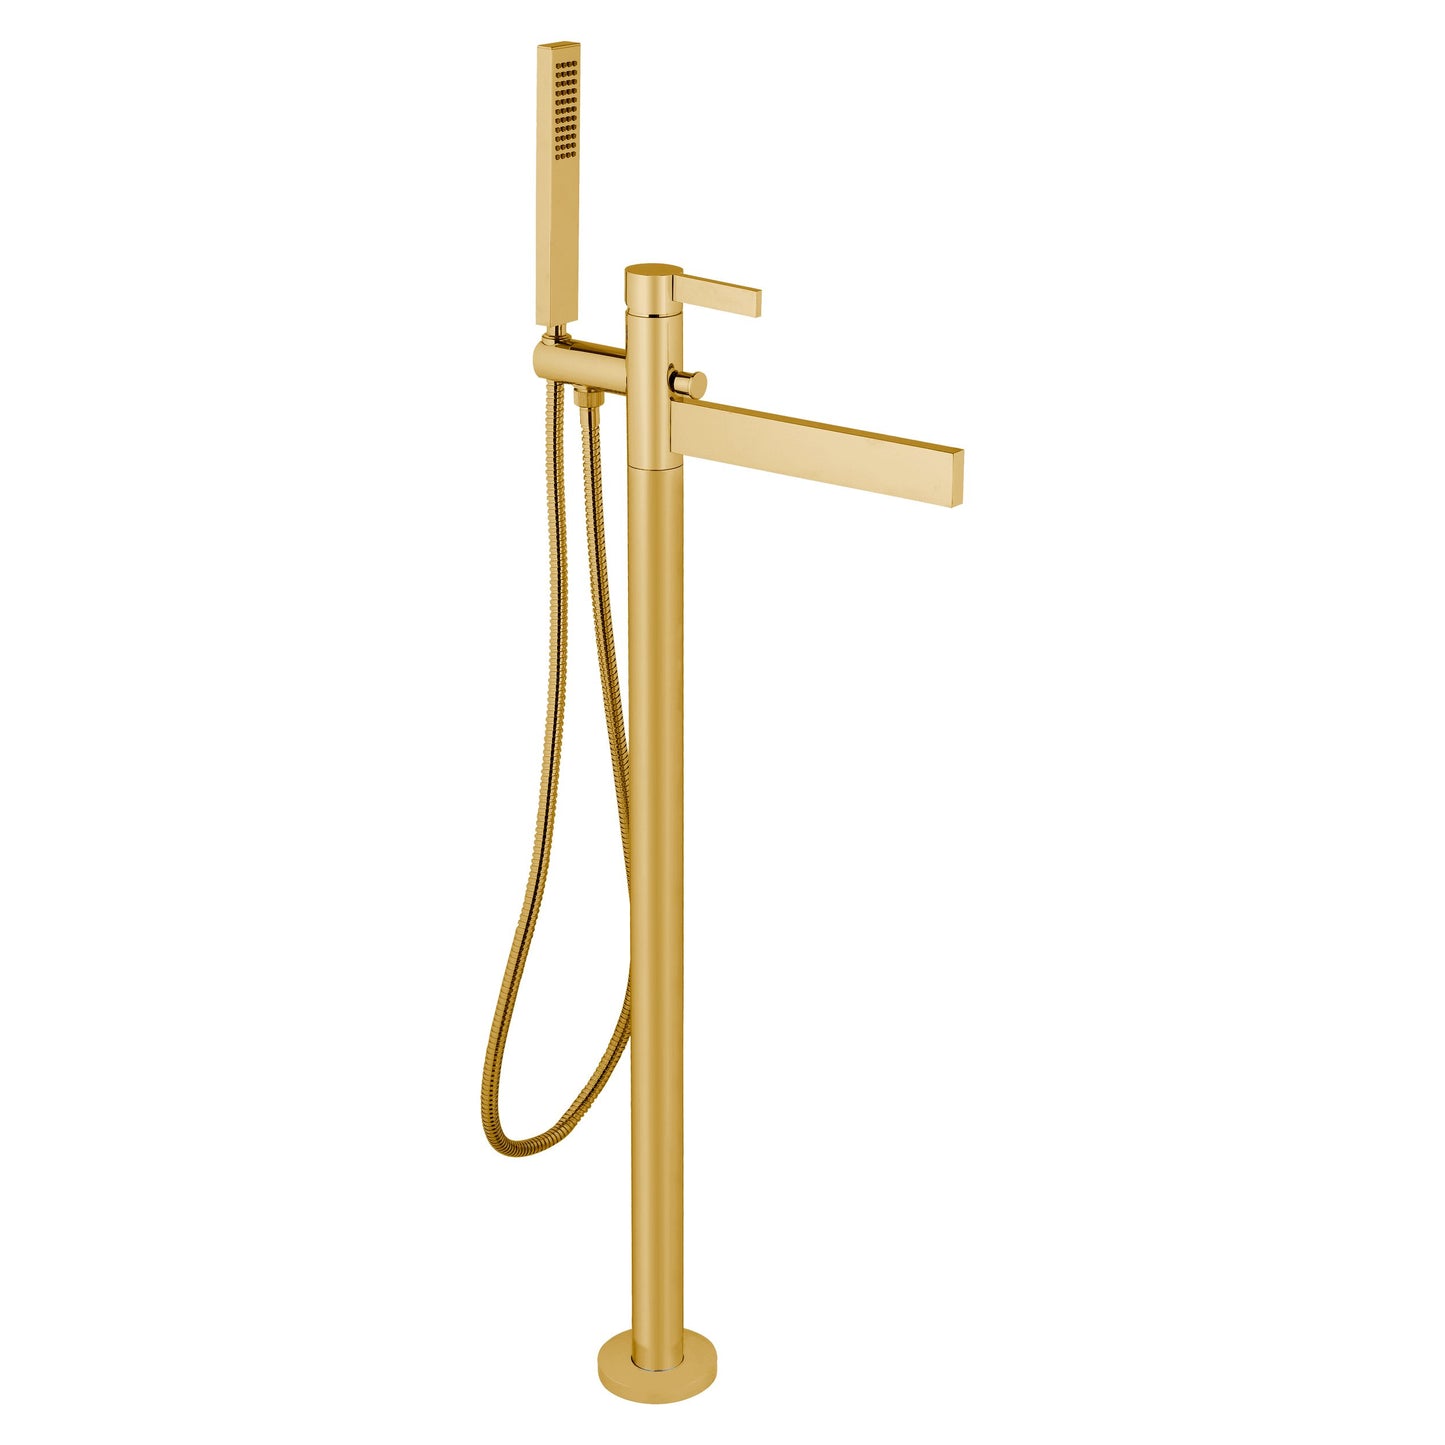 Aquadesign Products Floor Mount Tub Filler (Caso 700018) - Brushed Gold